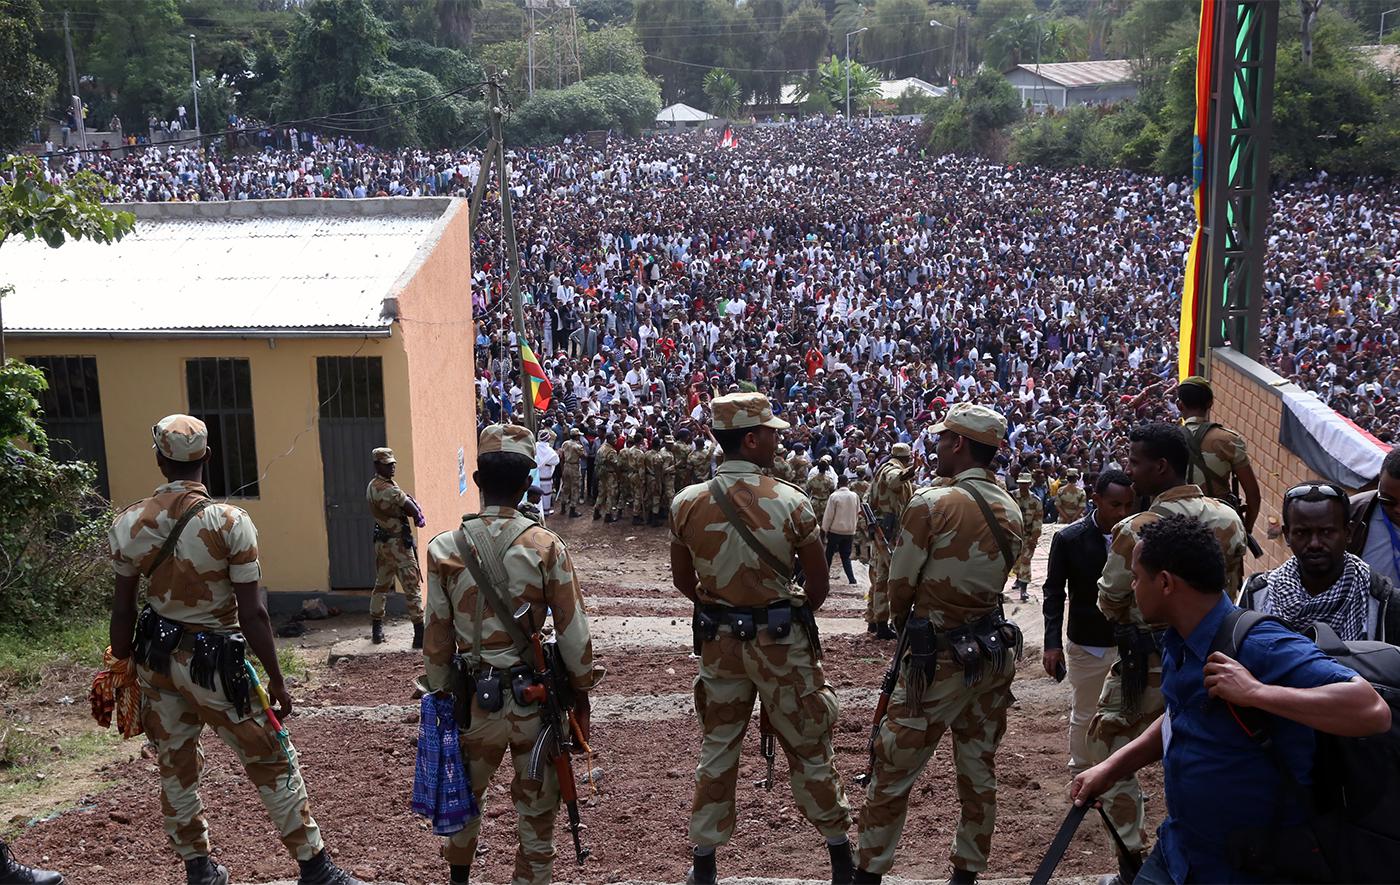 Armed security officials watch as protesters stage a protest against government during the Irreechaa cultural festival in Bishoftu, Ethiopia on October 02, 2016.